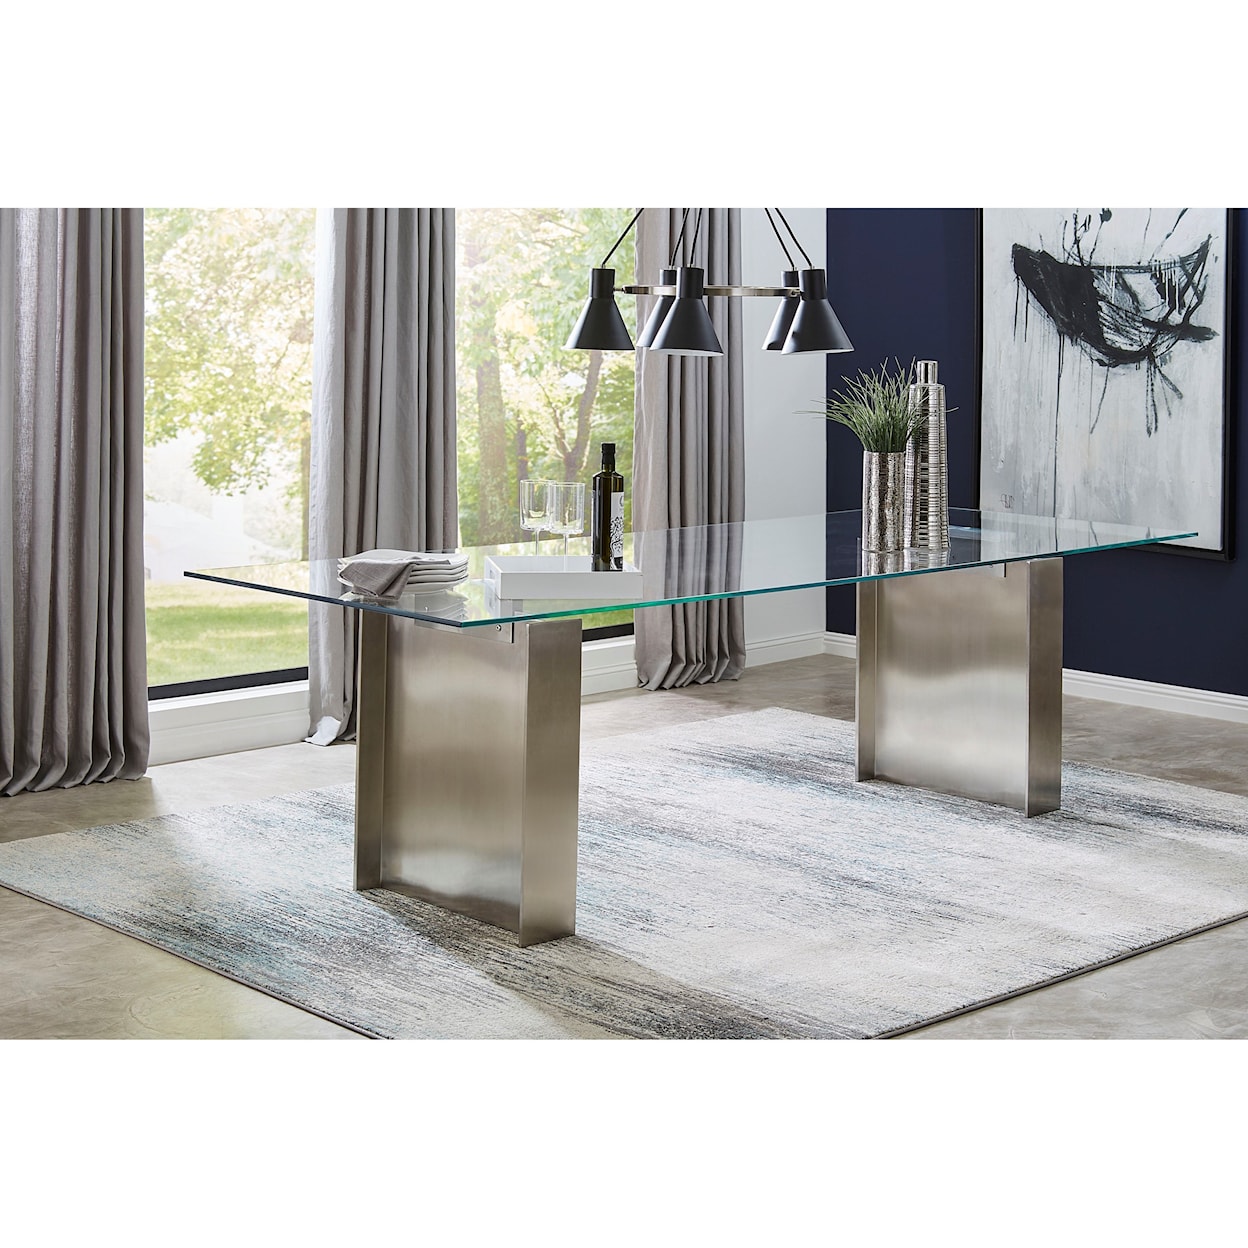 Modus International Omnia 104" Table in Brushed Stainless Steel